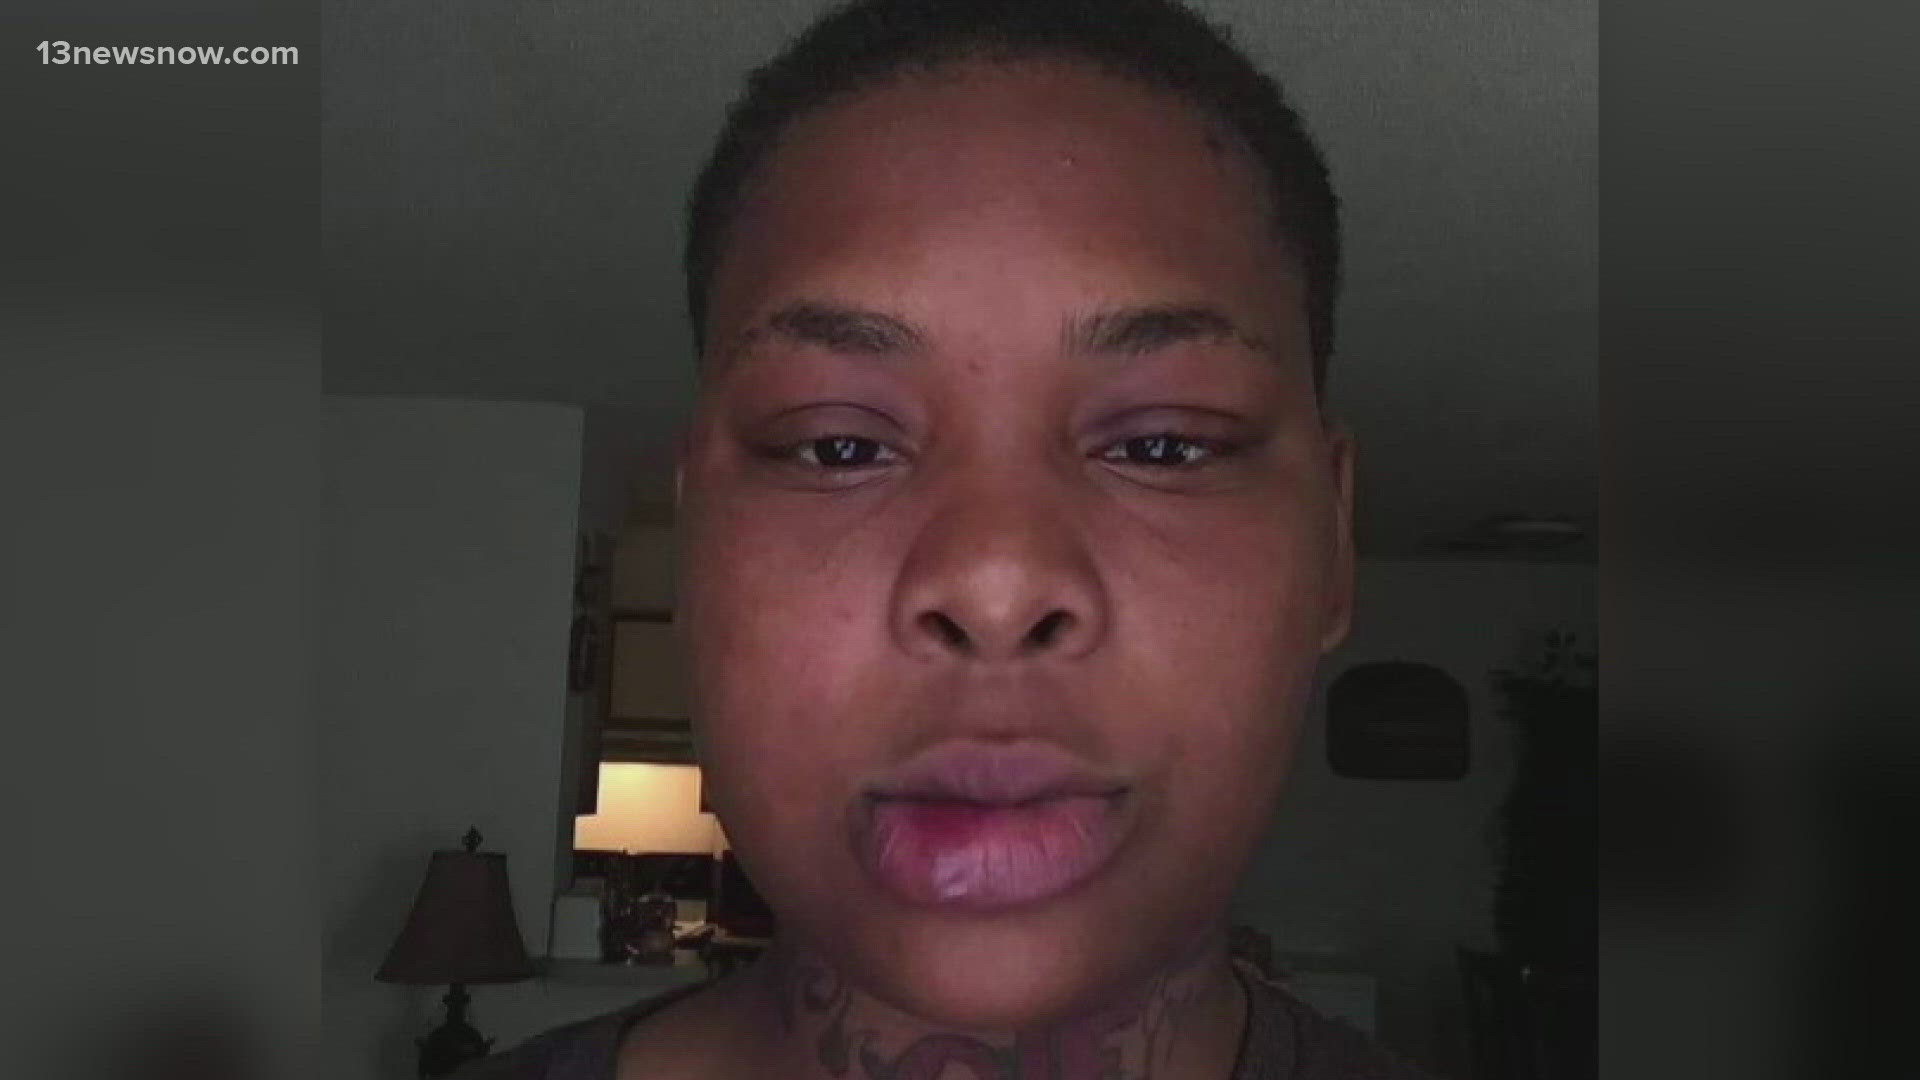 Ebony Holmes said a Norfolk police officer punched her in the face during a traffic stop in 2021, after two officers gave her different commands.